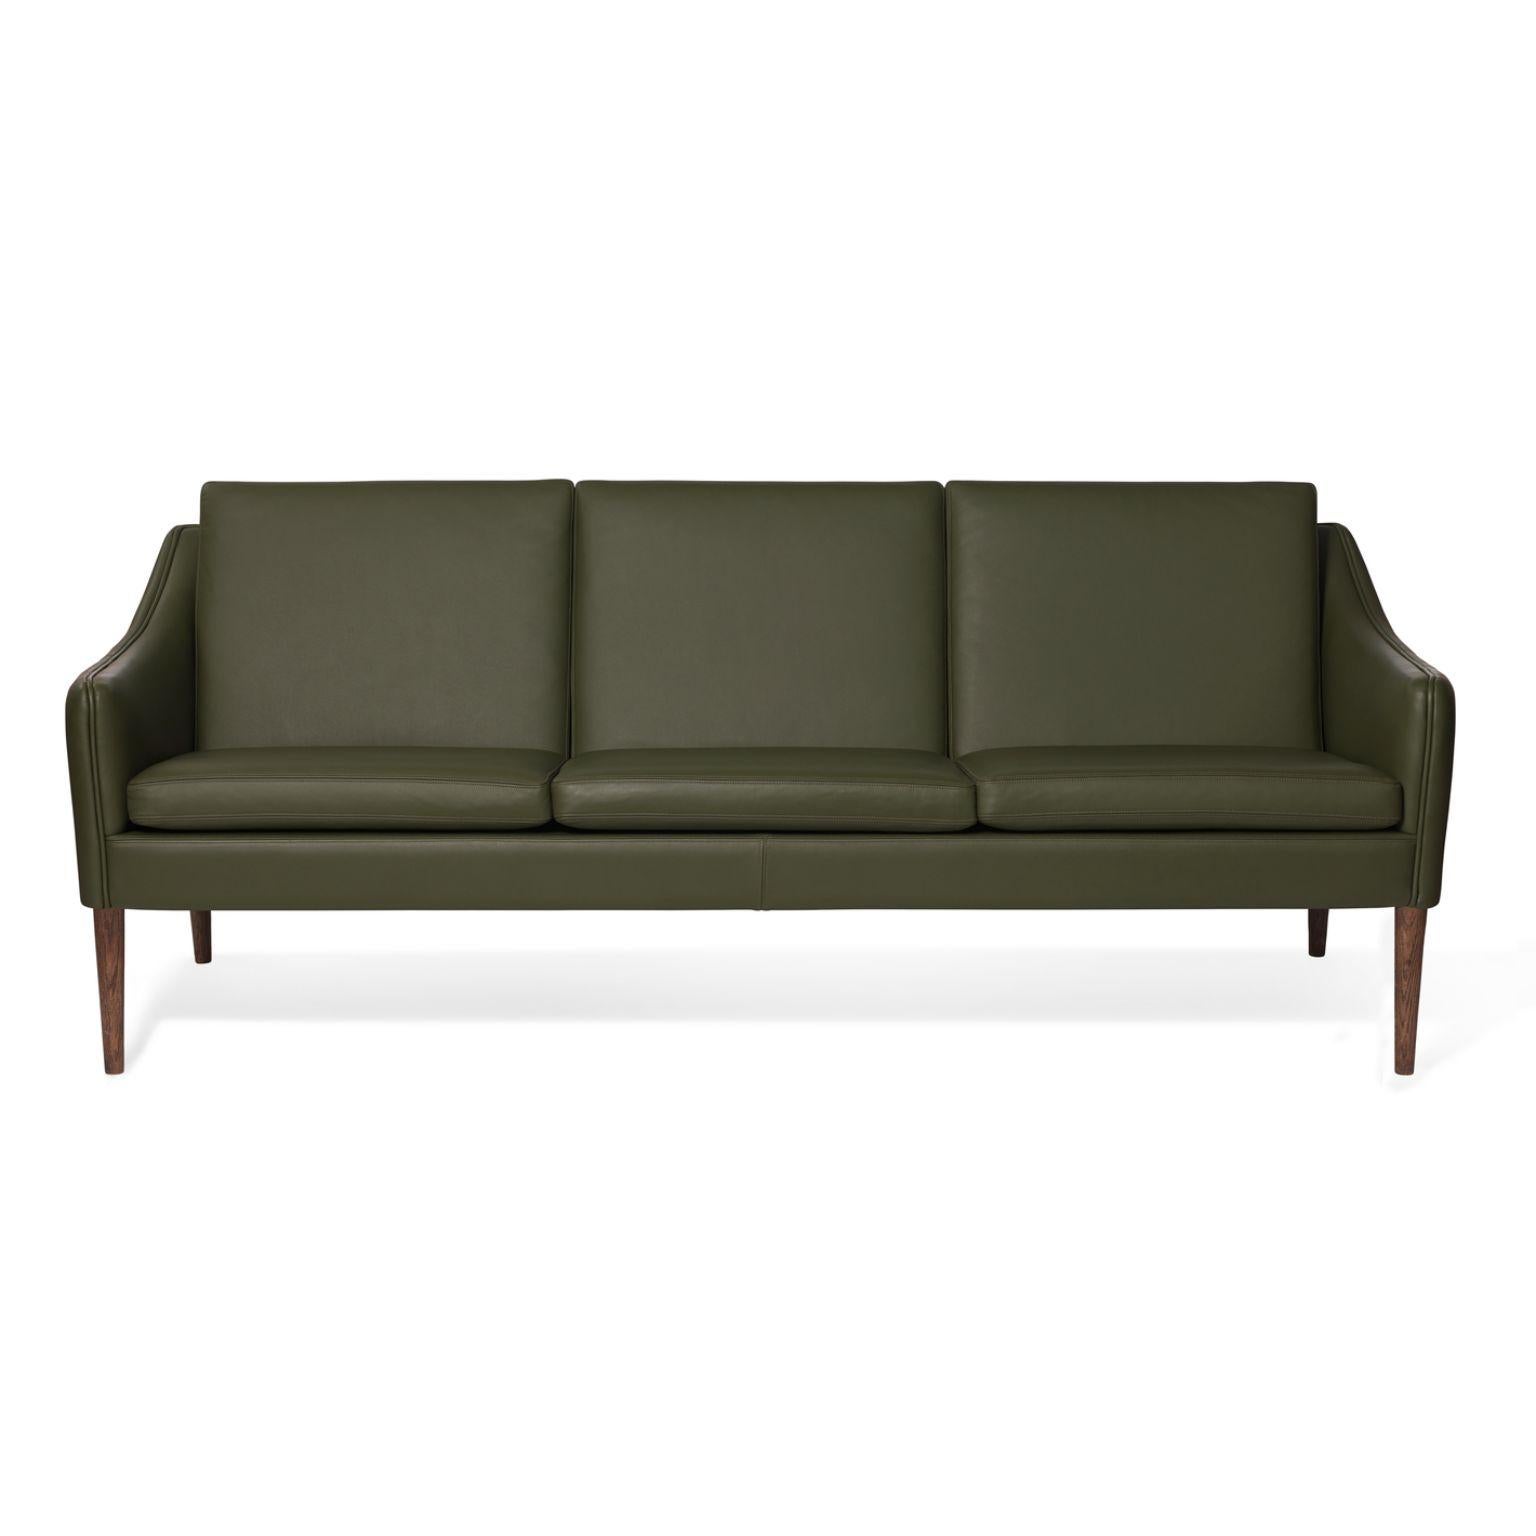 Mr Olsen 3 Seater Oak Challenger pickle green leather by Warm Nordic
Dimensions: D201 x W79 x H 78/46 cm
Material: Textile upholstery, Foam, Spring system, Solid oiled oak legs, Solid smoked oak legs, Leather
Weight: 50 kg
Also available in